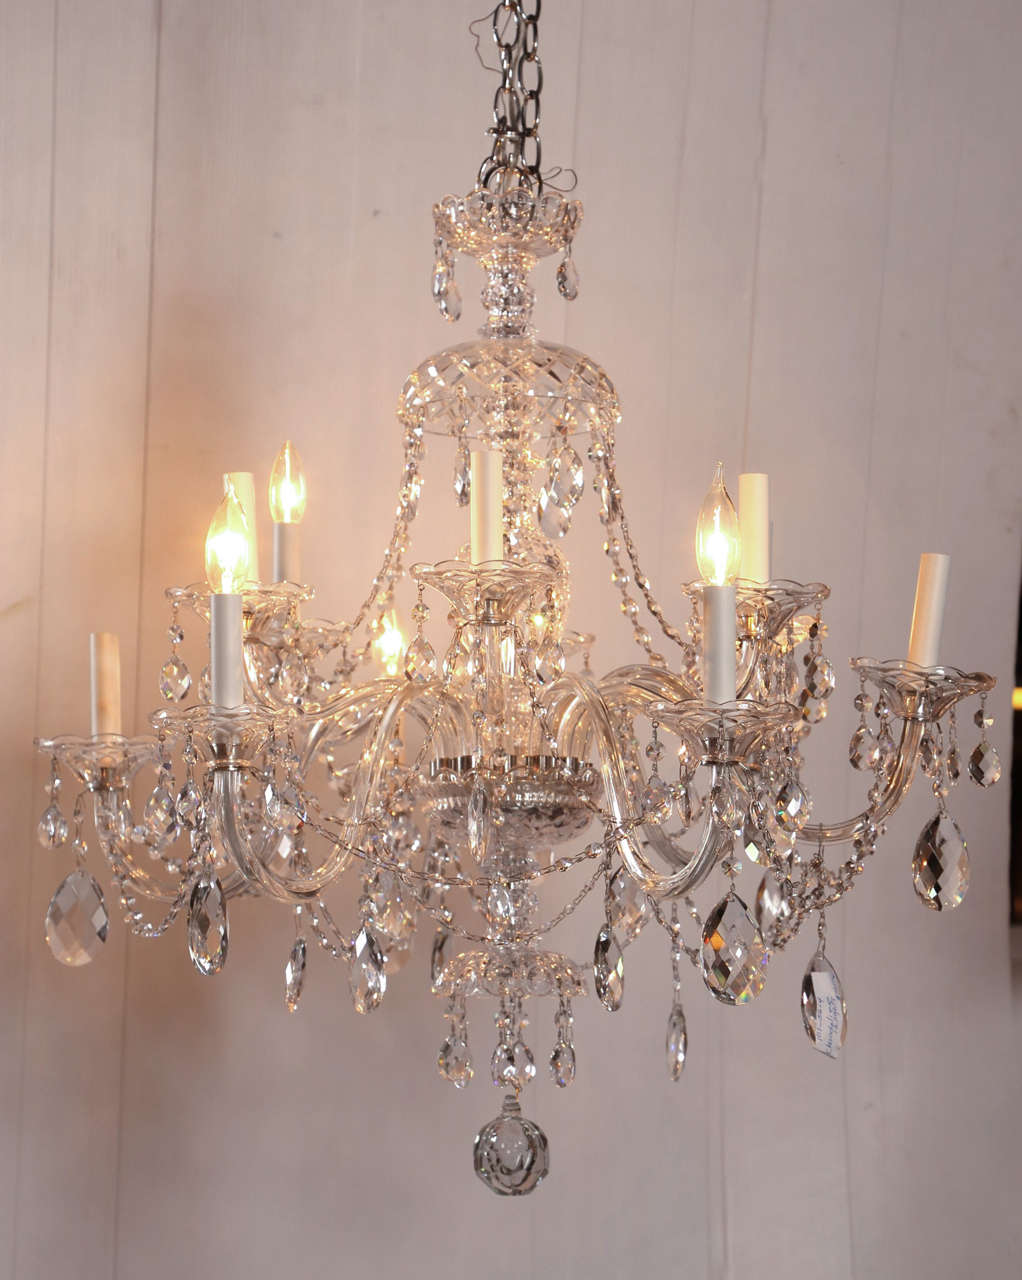 Fine Cut Crystal Chandelier Twelve Arm. This fine Austrian Cut Crystal Chandelier having a central column cut crystal support with a cut crystal canopy and several tiers leading to a group of six arms on two separate tiers giving a total of twelve